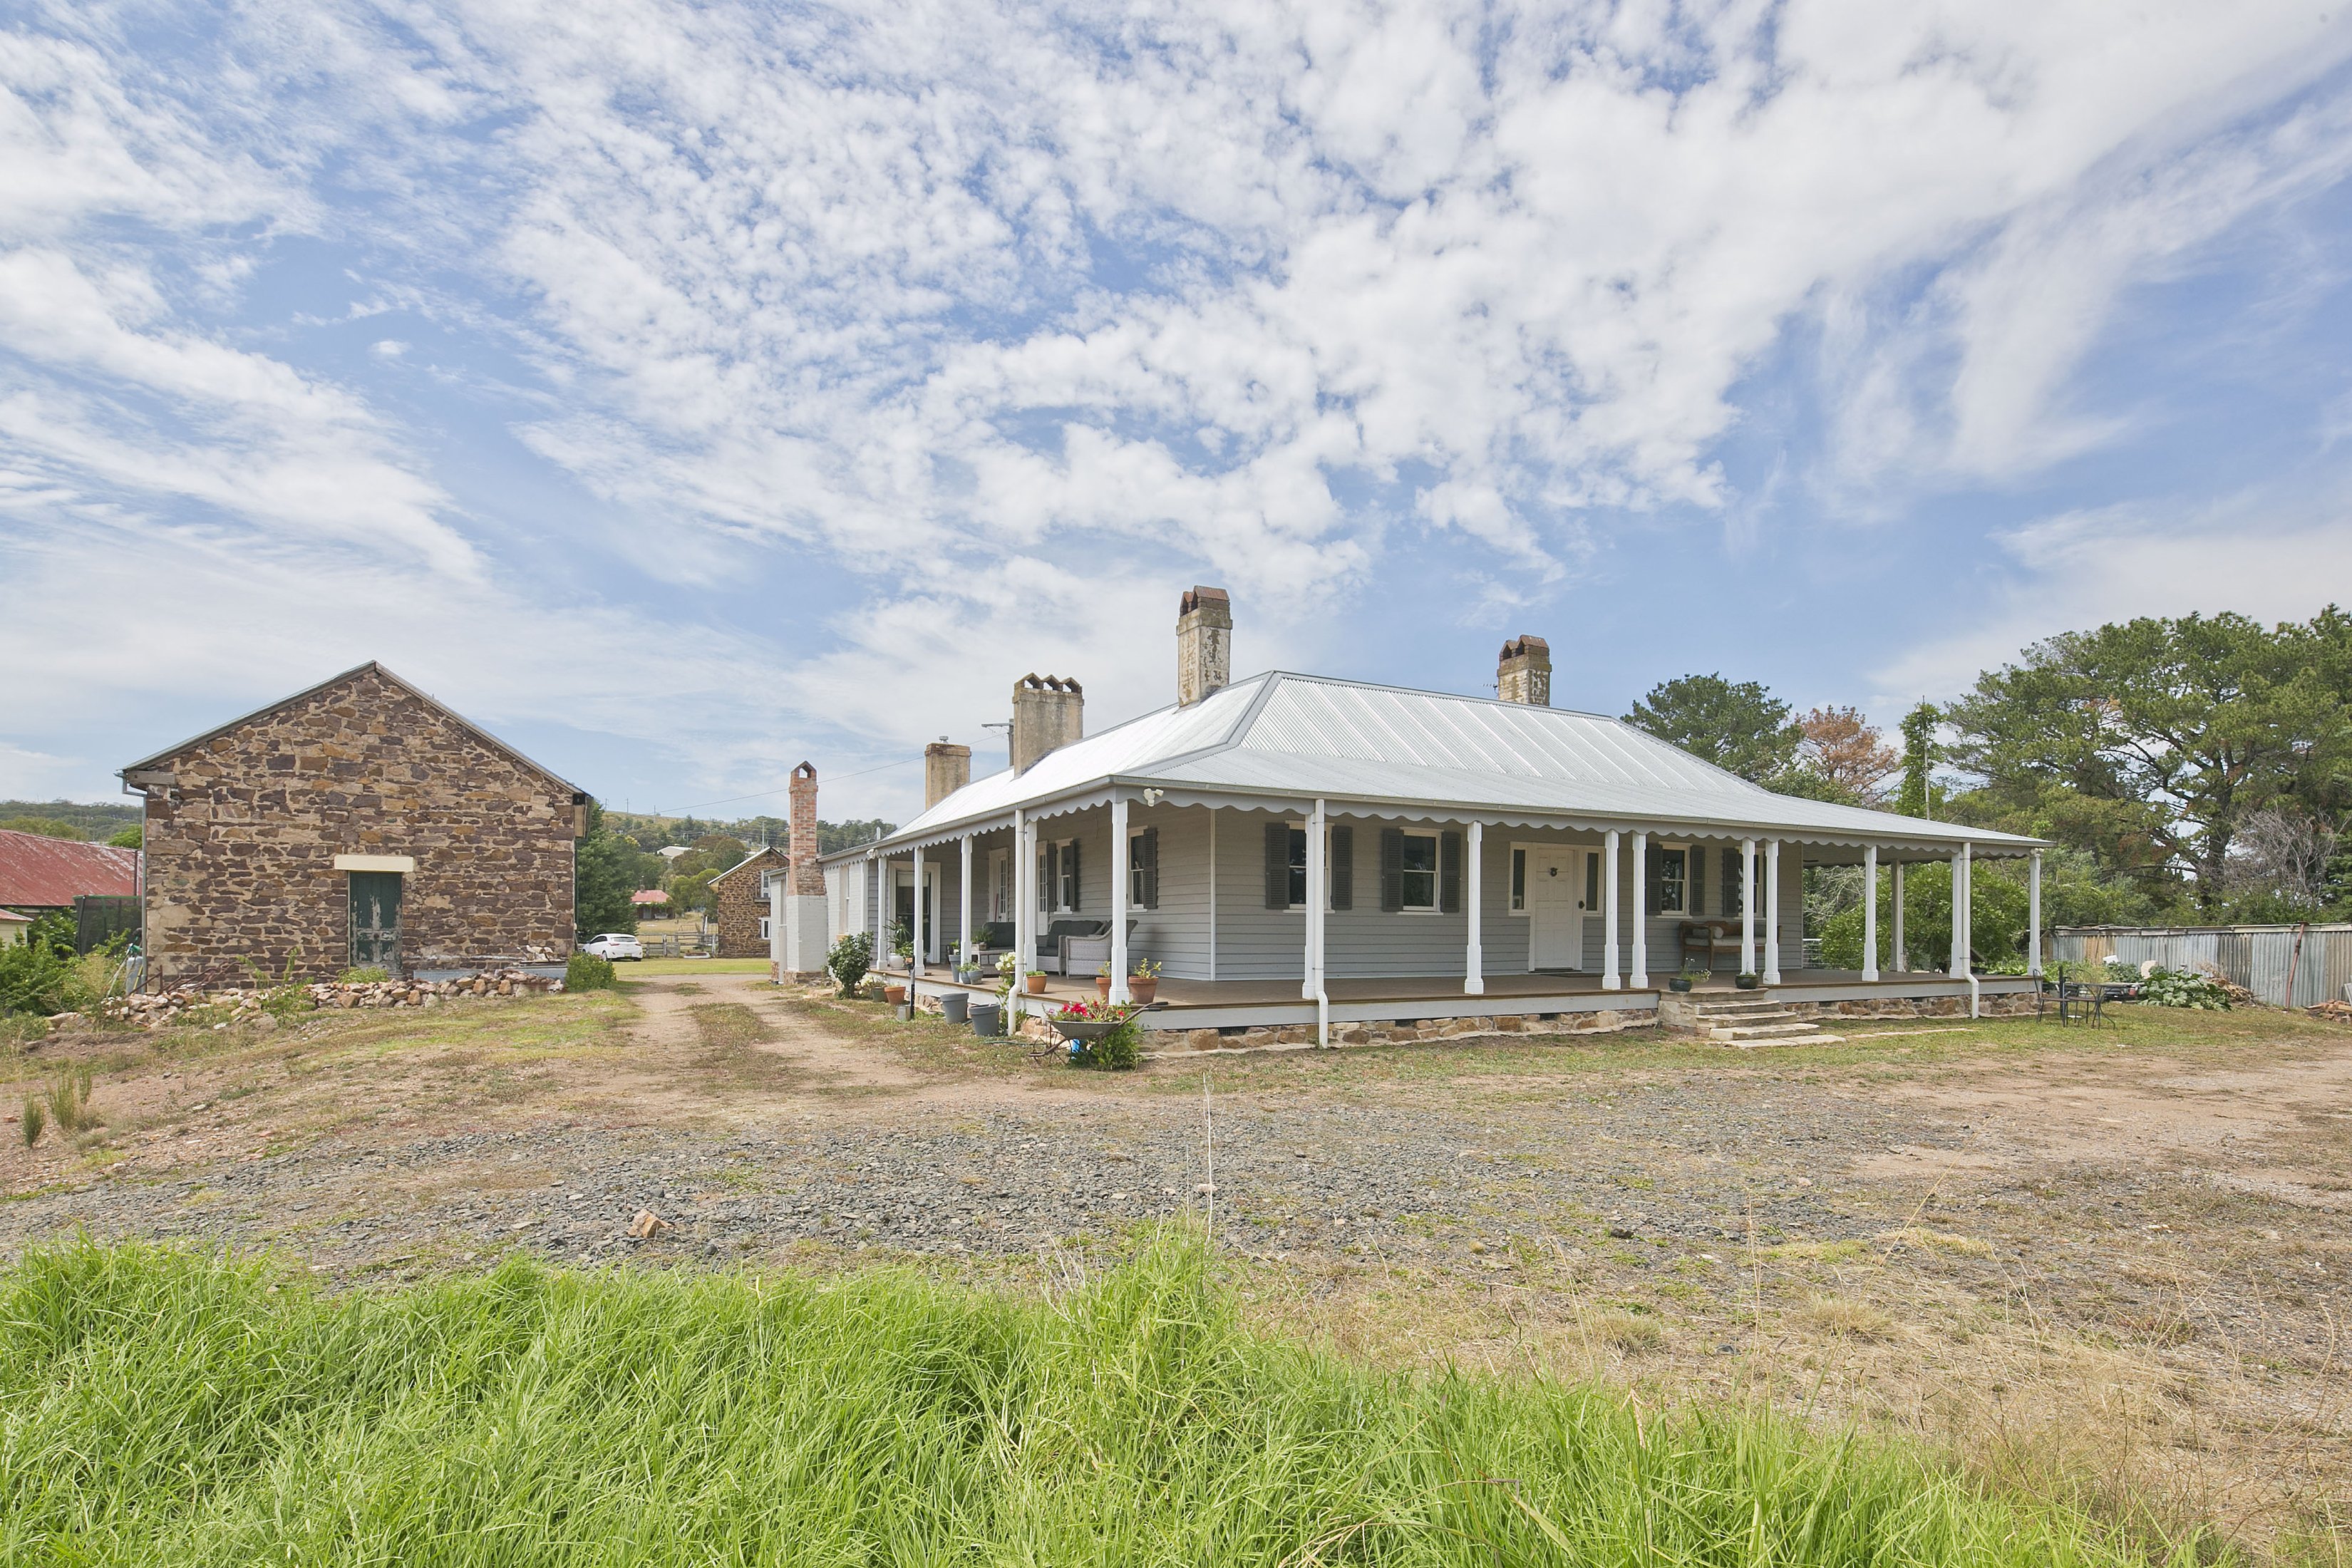 Steeped in convict history, Goulburn’s Lansdowne Park goes up for auction